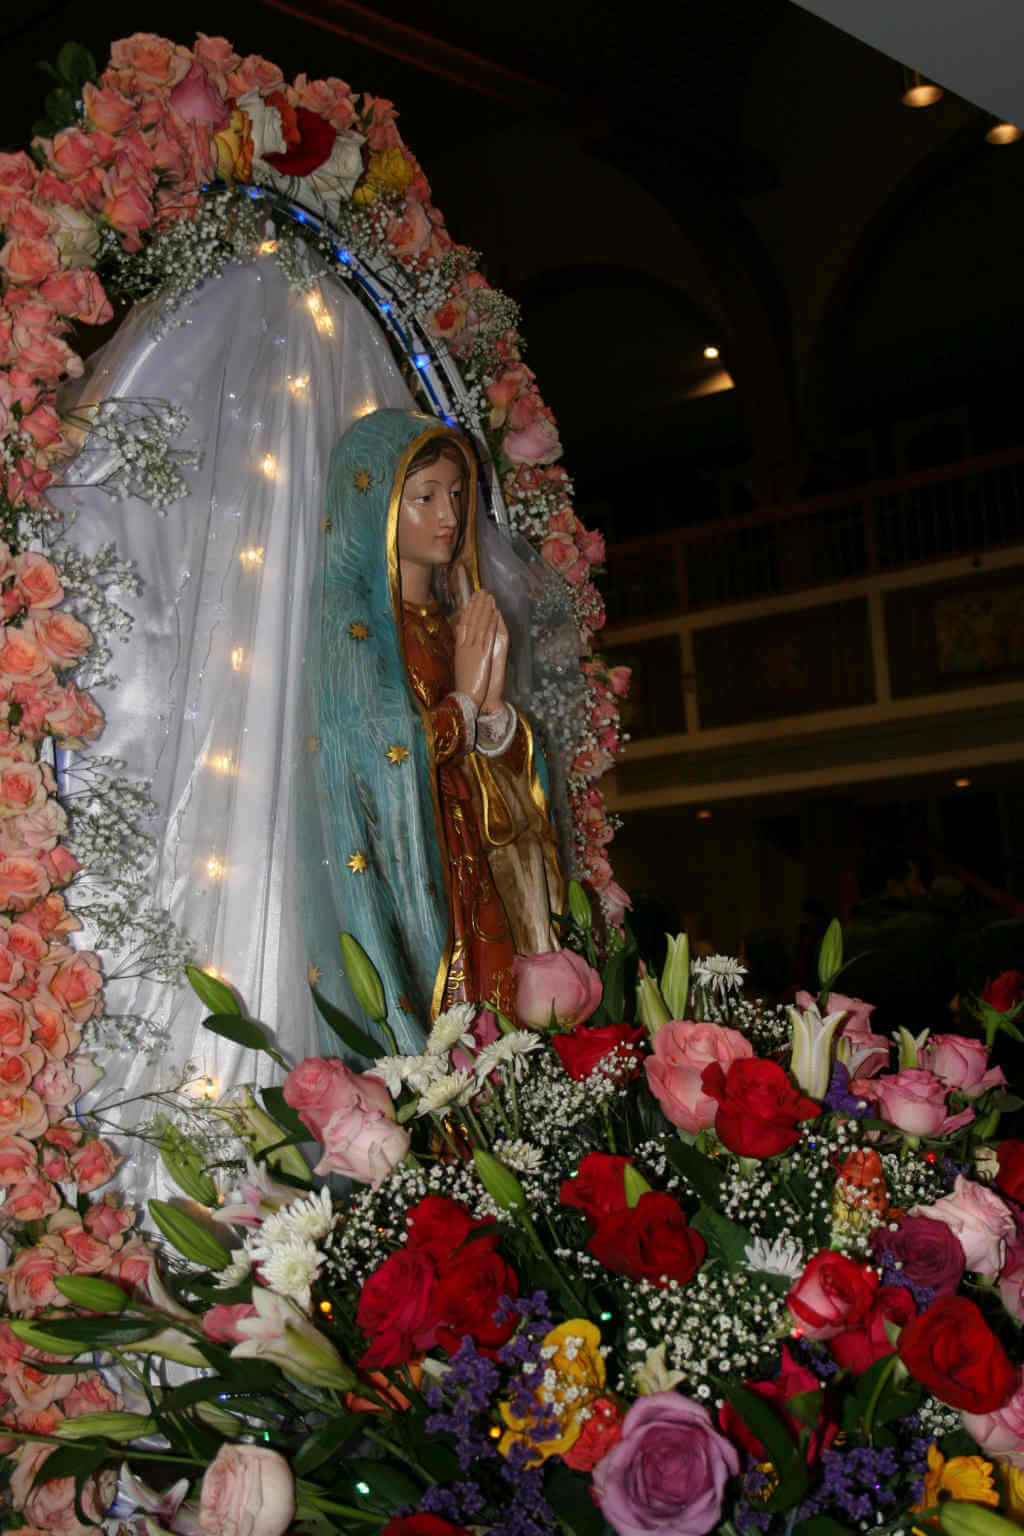 Statue of Our Lady of Guadalupe was part of procession in Wildwood Dec. 12.